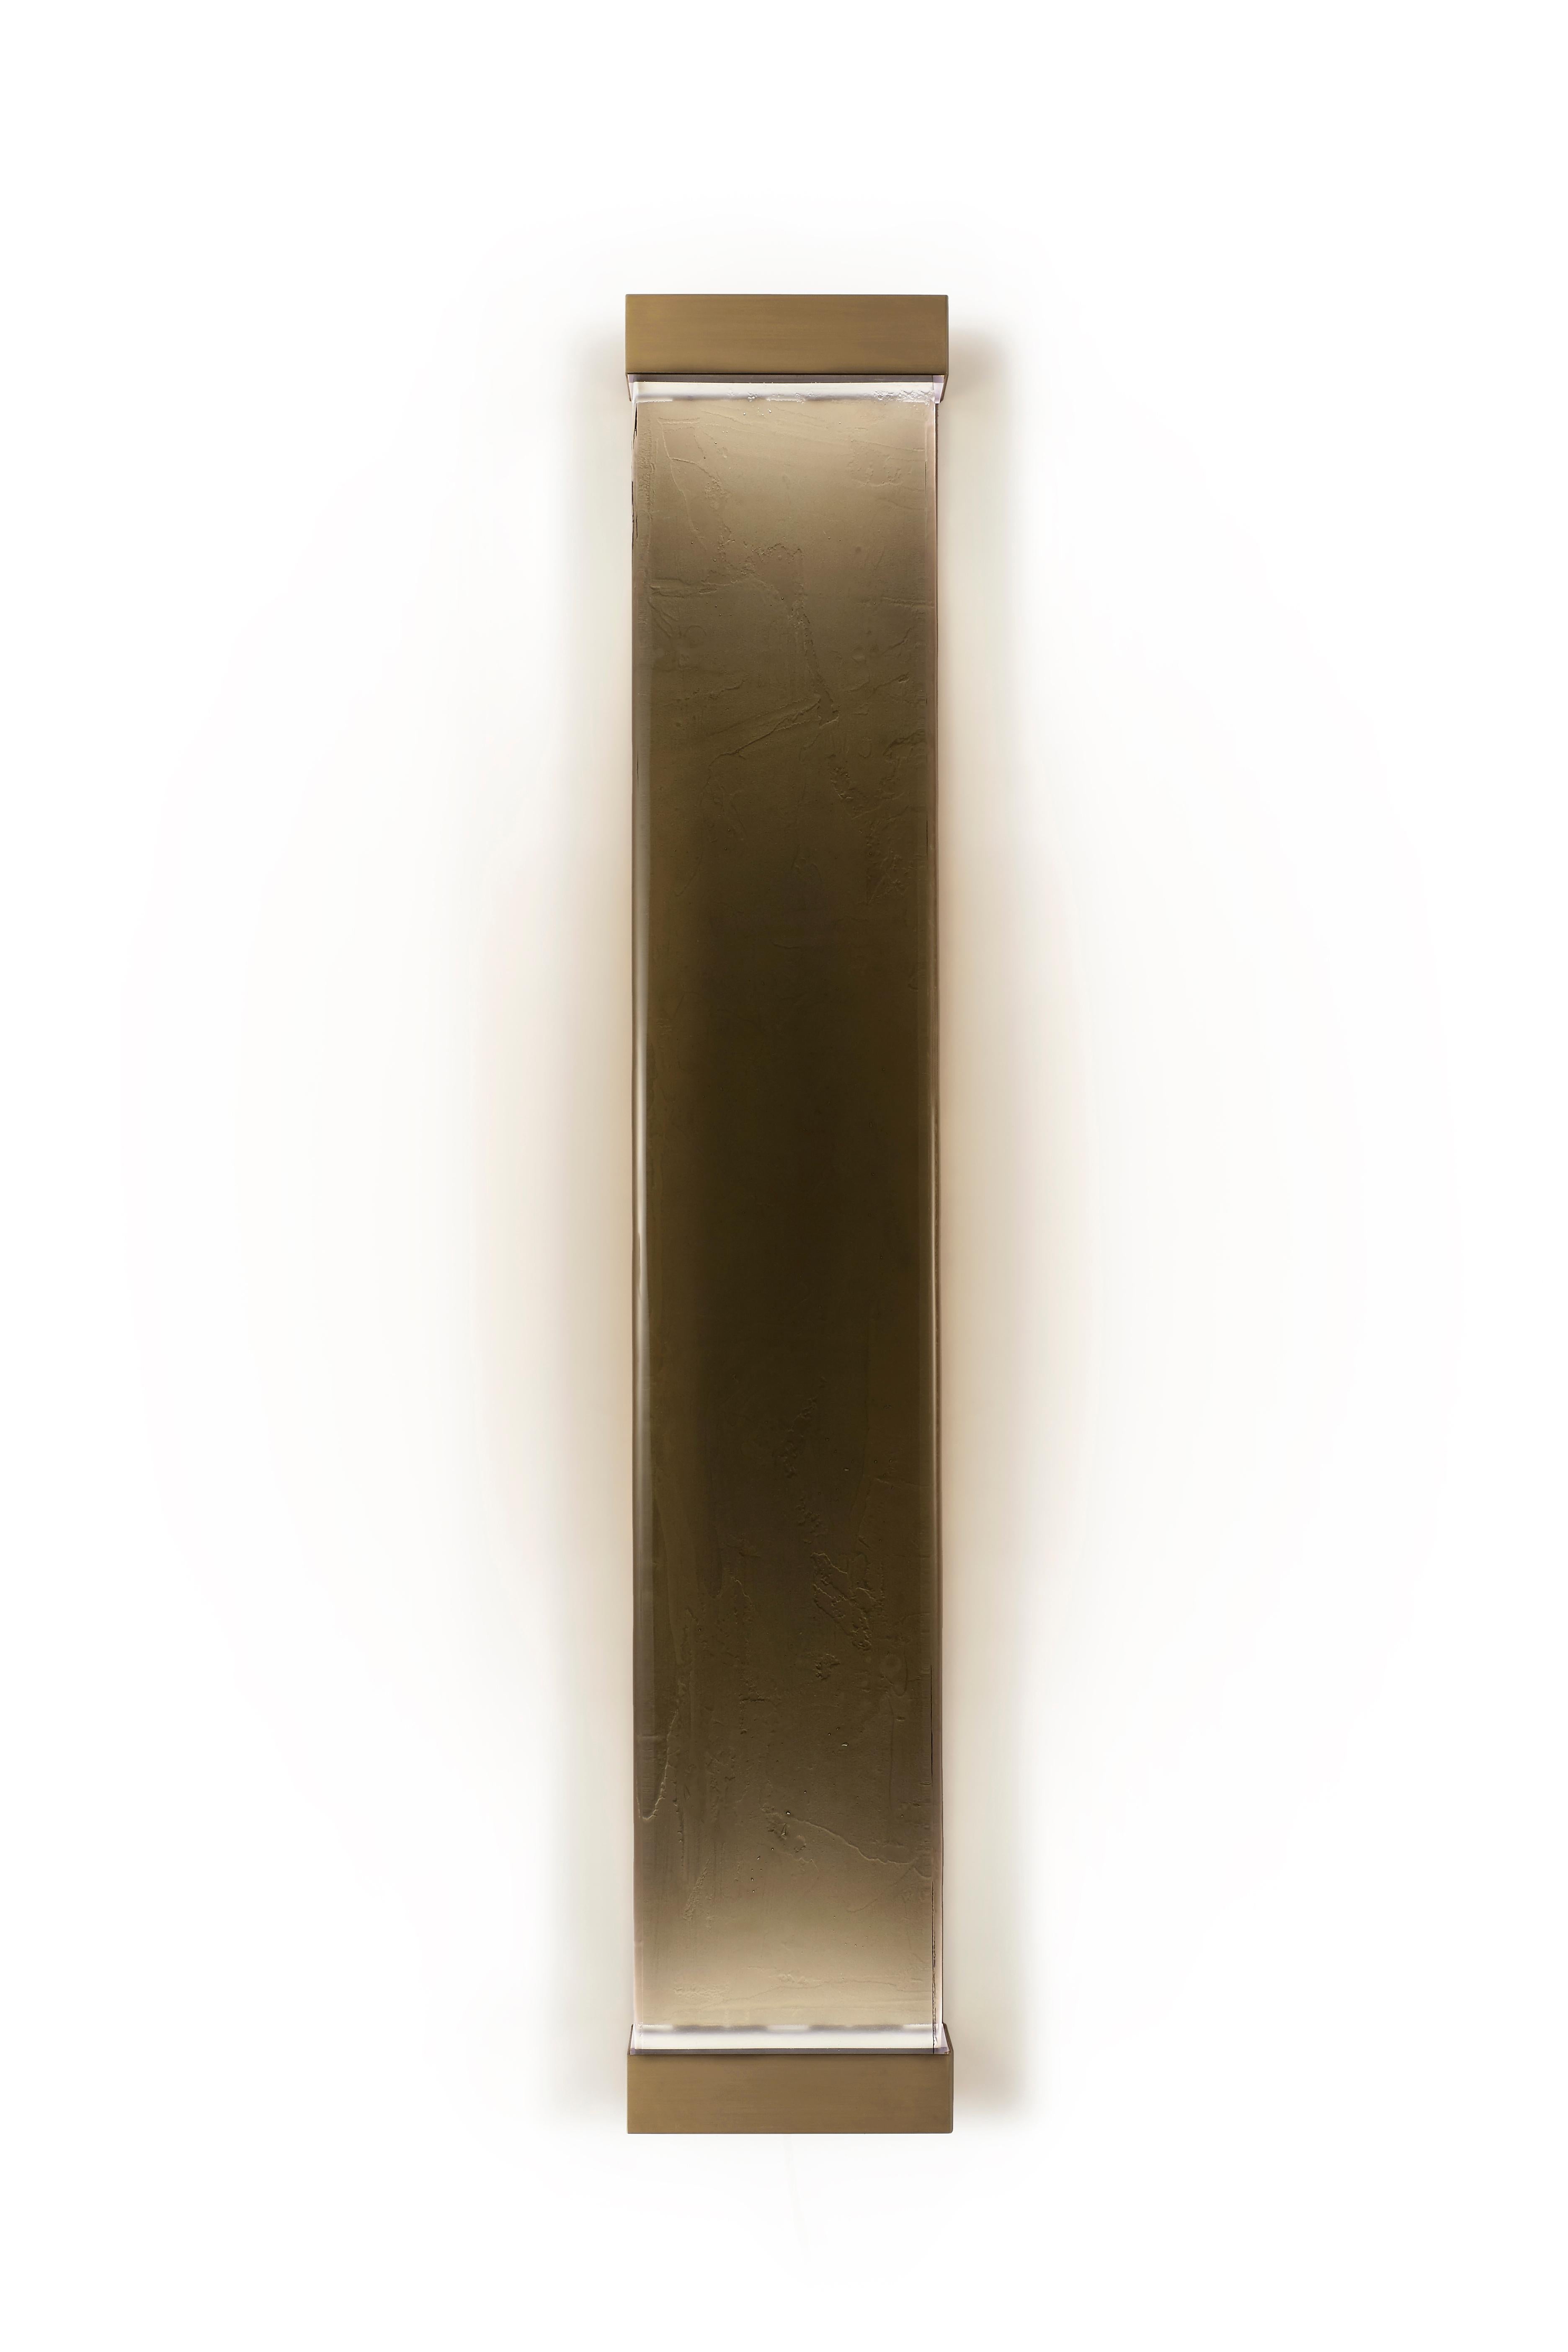 Jud Wall Lamps Polvere by Draga&Aurel Resin, 21st Century Glass Resin Brass For Sale